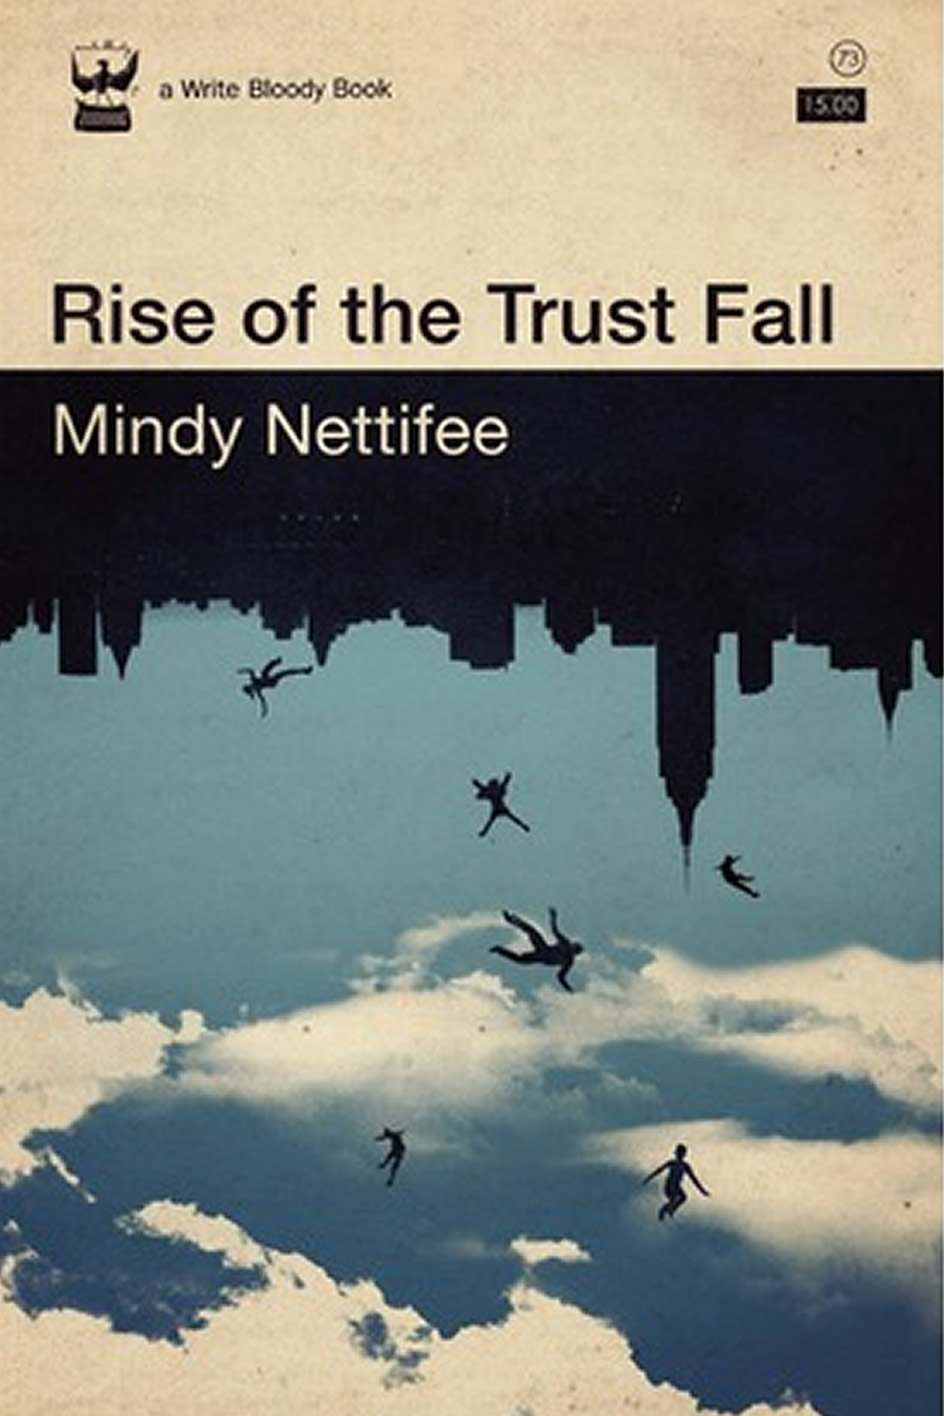 Book cover features an upside down city skyline with figures falling into a sky of clouds